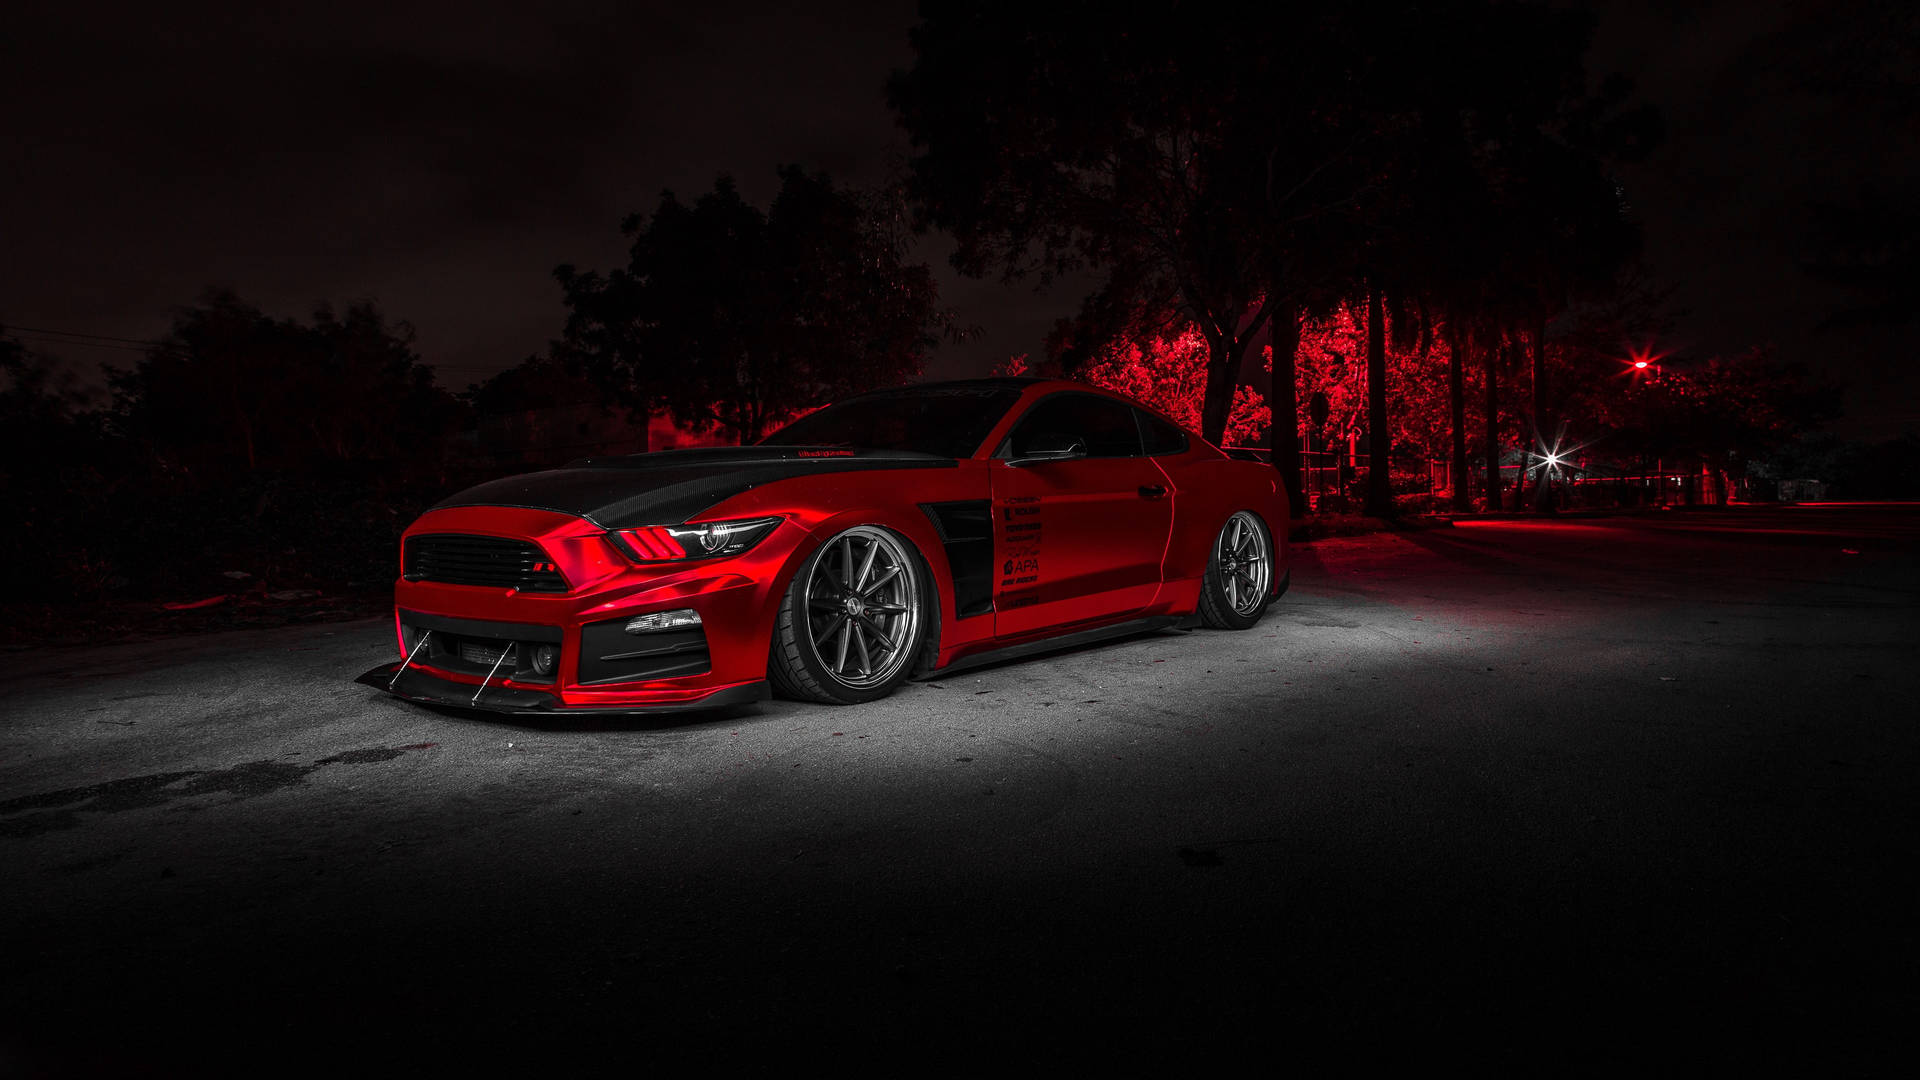 Ford Mustang Wallpaper Download | MobCup